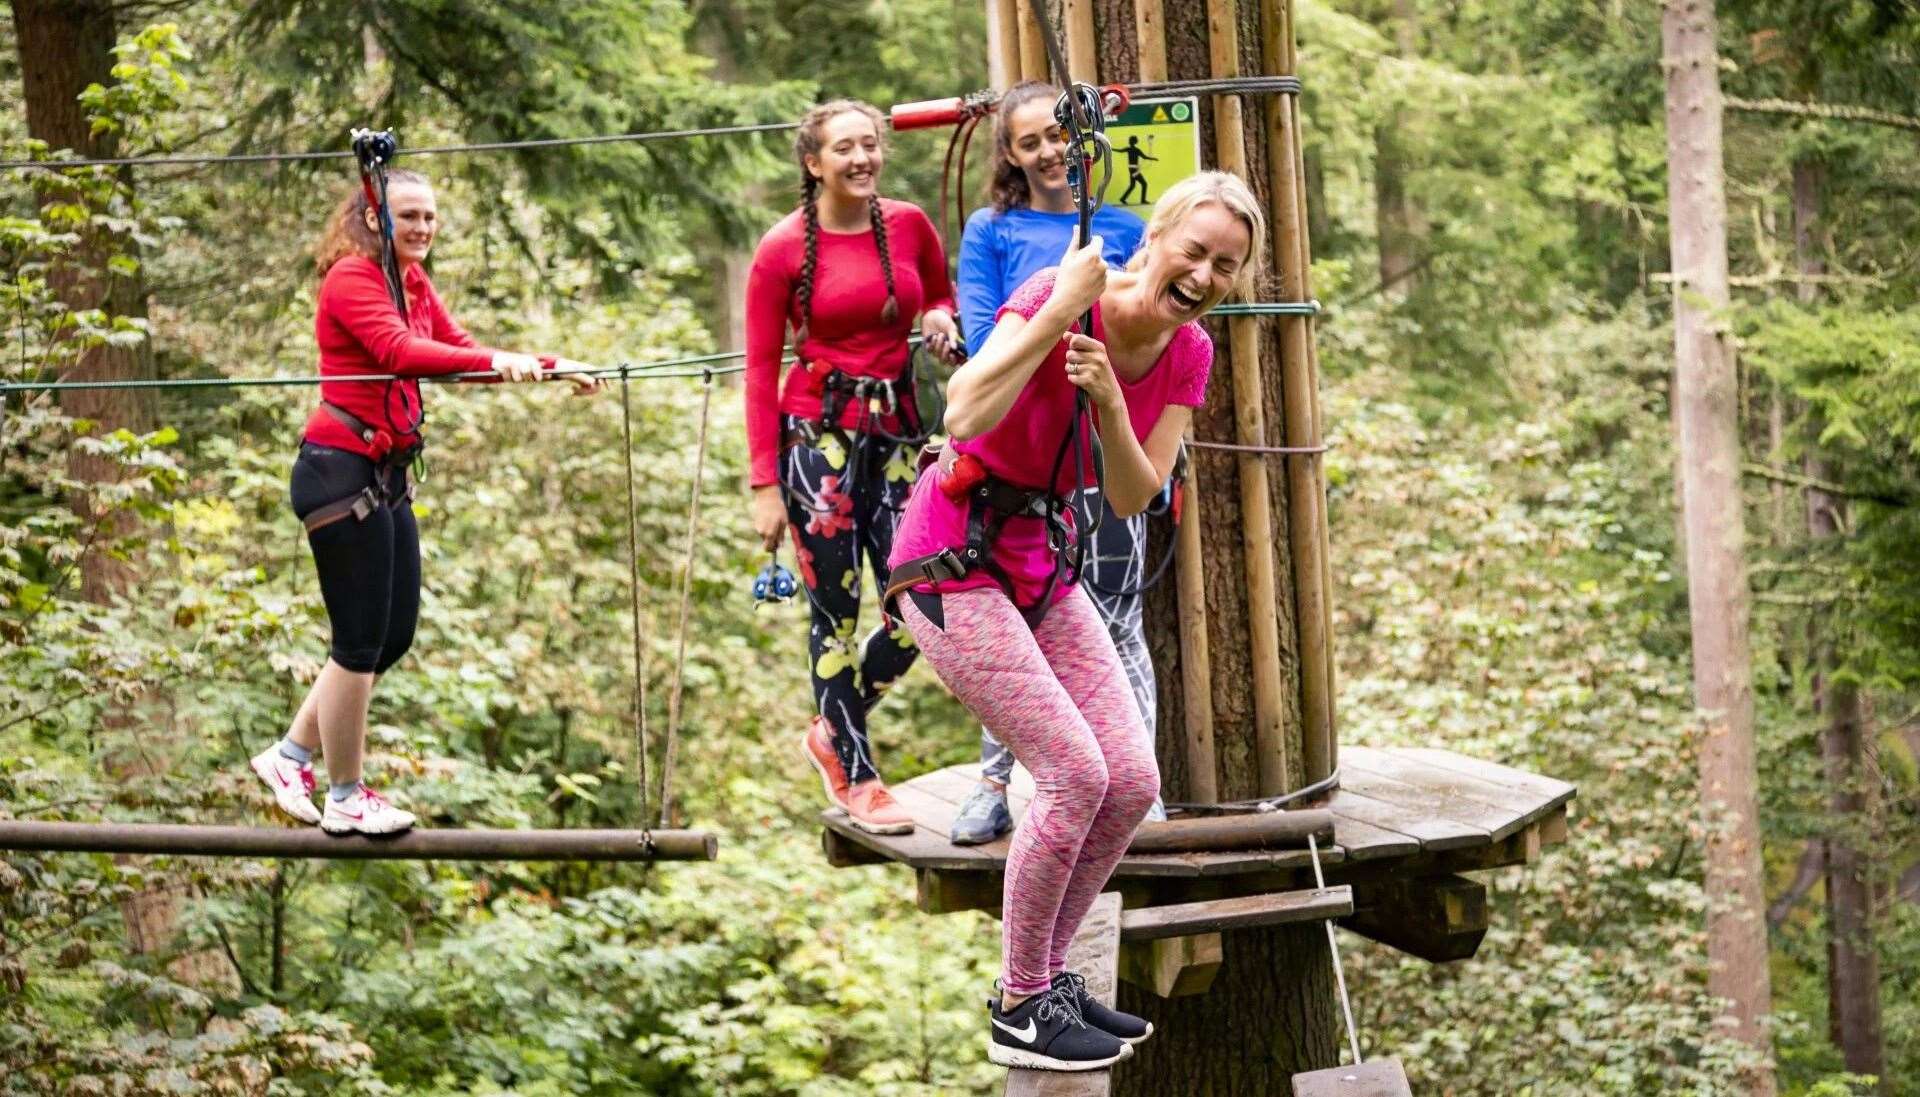 Go Ape, one of the UK’s most-booked outdoor experiences, can be found at Leeds Castle. Picture: Leeds Castle